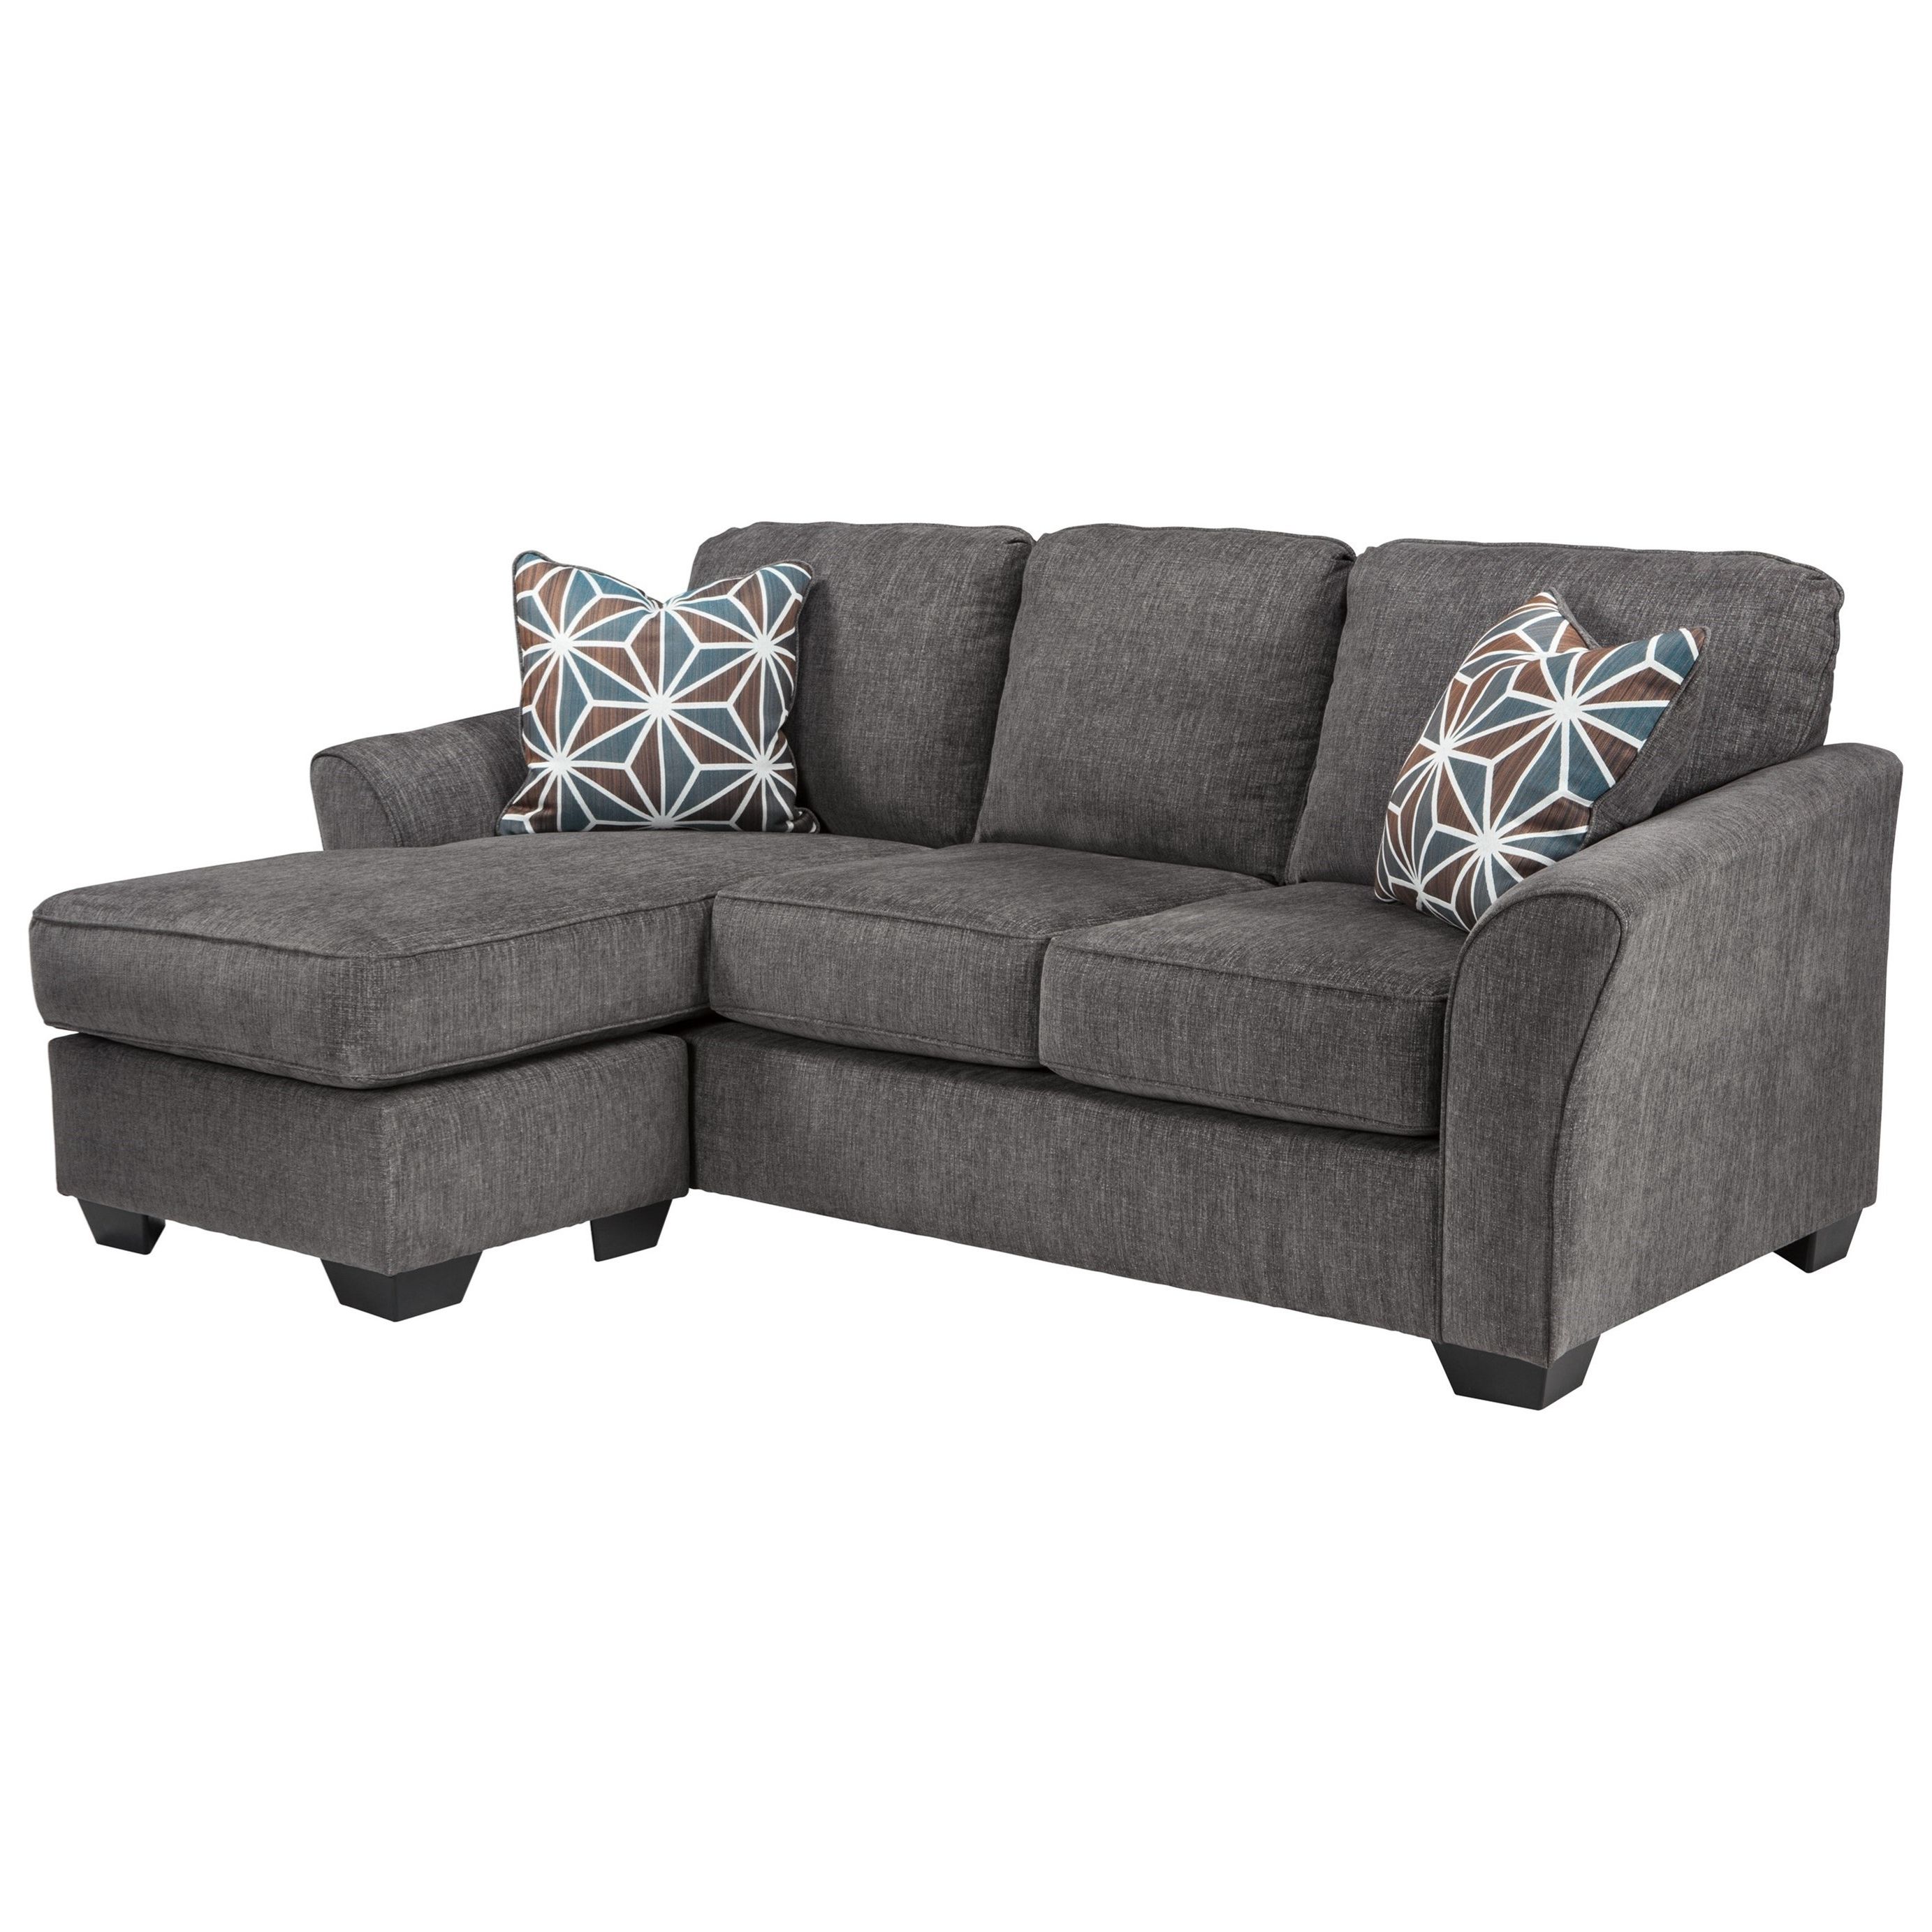 Preferred Benchcraft Brise Casual Contemporary Queen Sofa Chaise Sleeper With Chaise Sleepers (View 8 of 15)